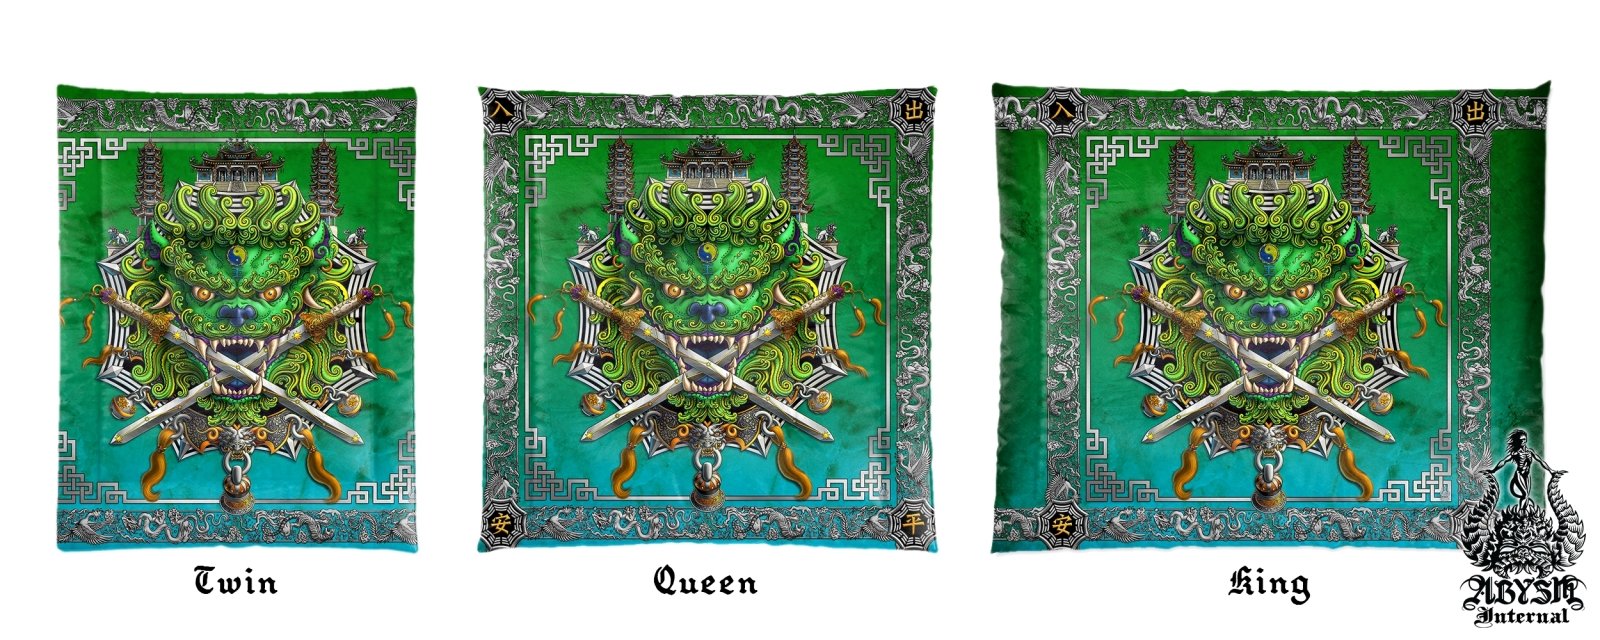 Asian Lion Bedding Set, Comforter and Duvet, Taiwan Sword Lion, Chinese Bed Cover, Gamer Bedroom, Indie Decor, King, Queen and Twin Size - Green - Abysm Internal